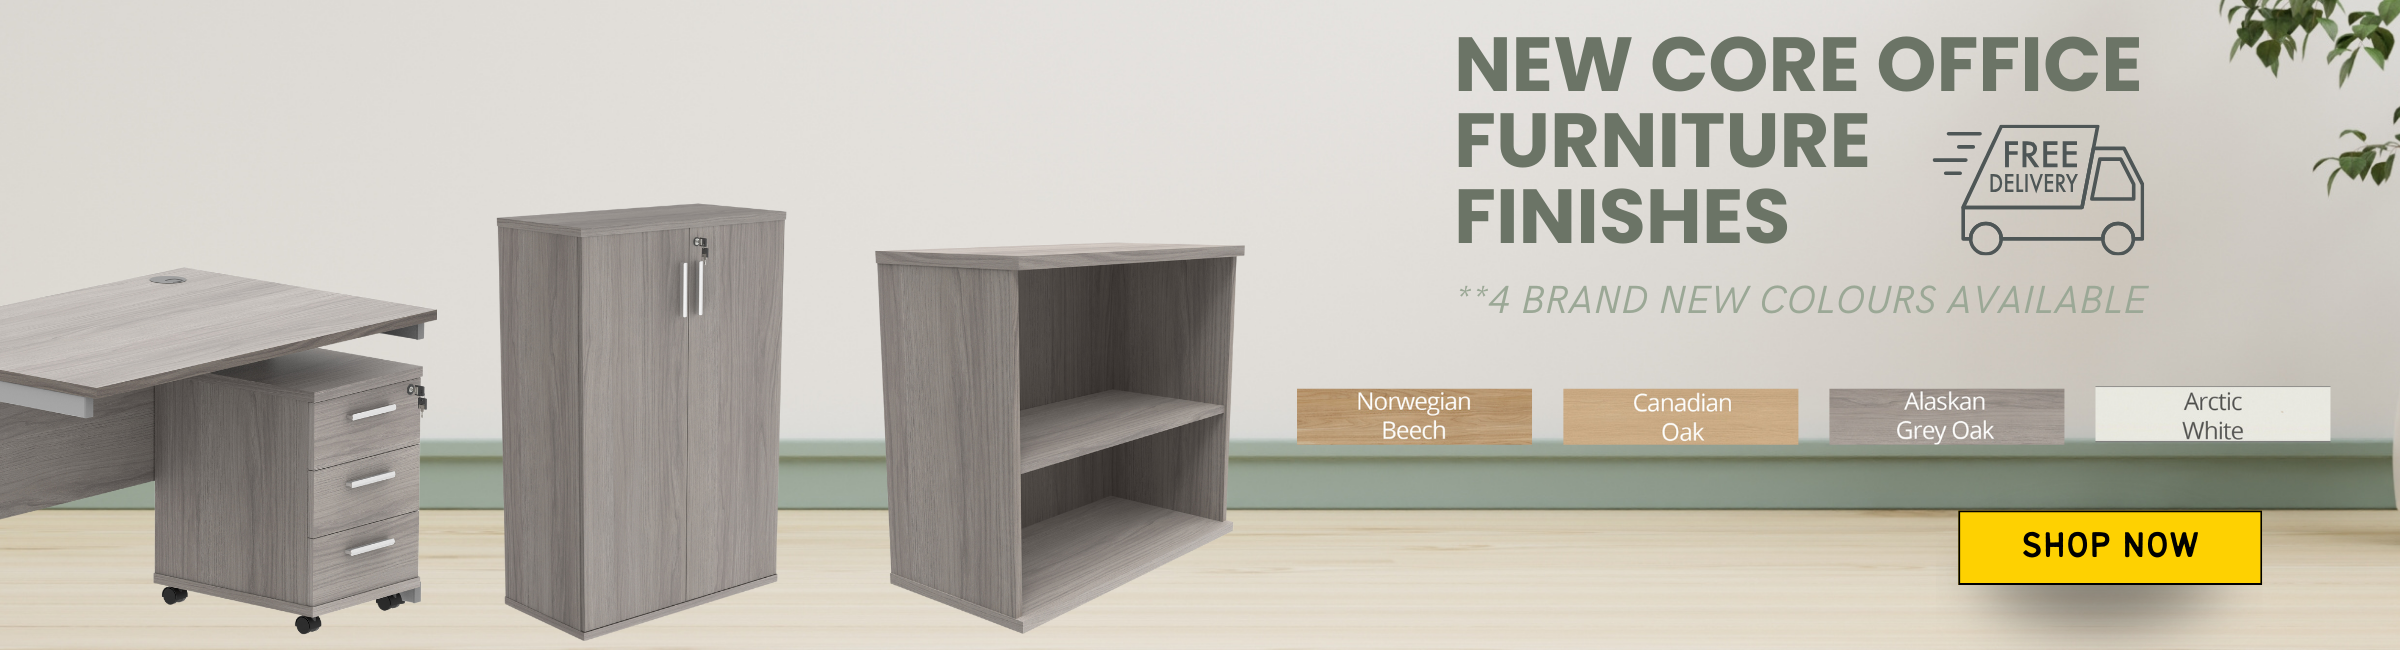 New Core office Furniture  Finishes